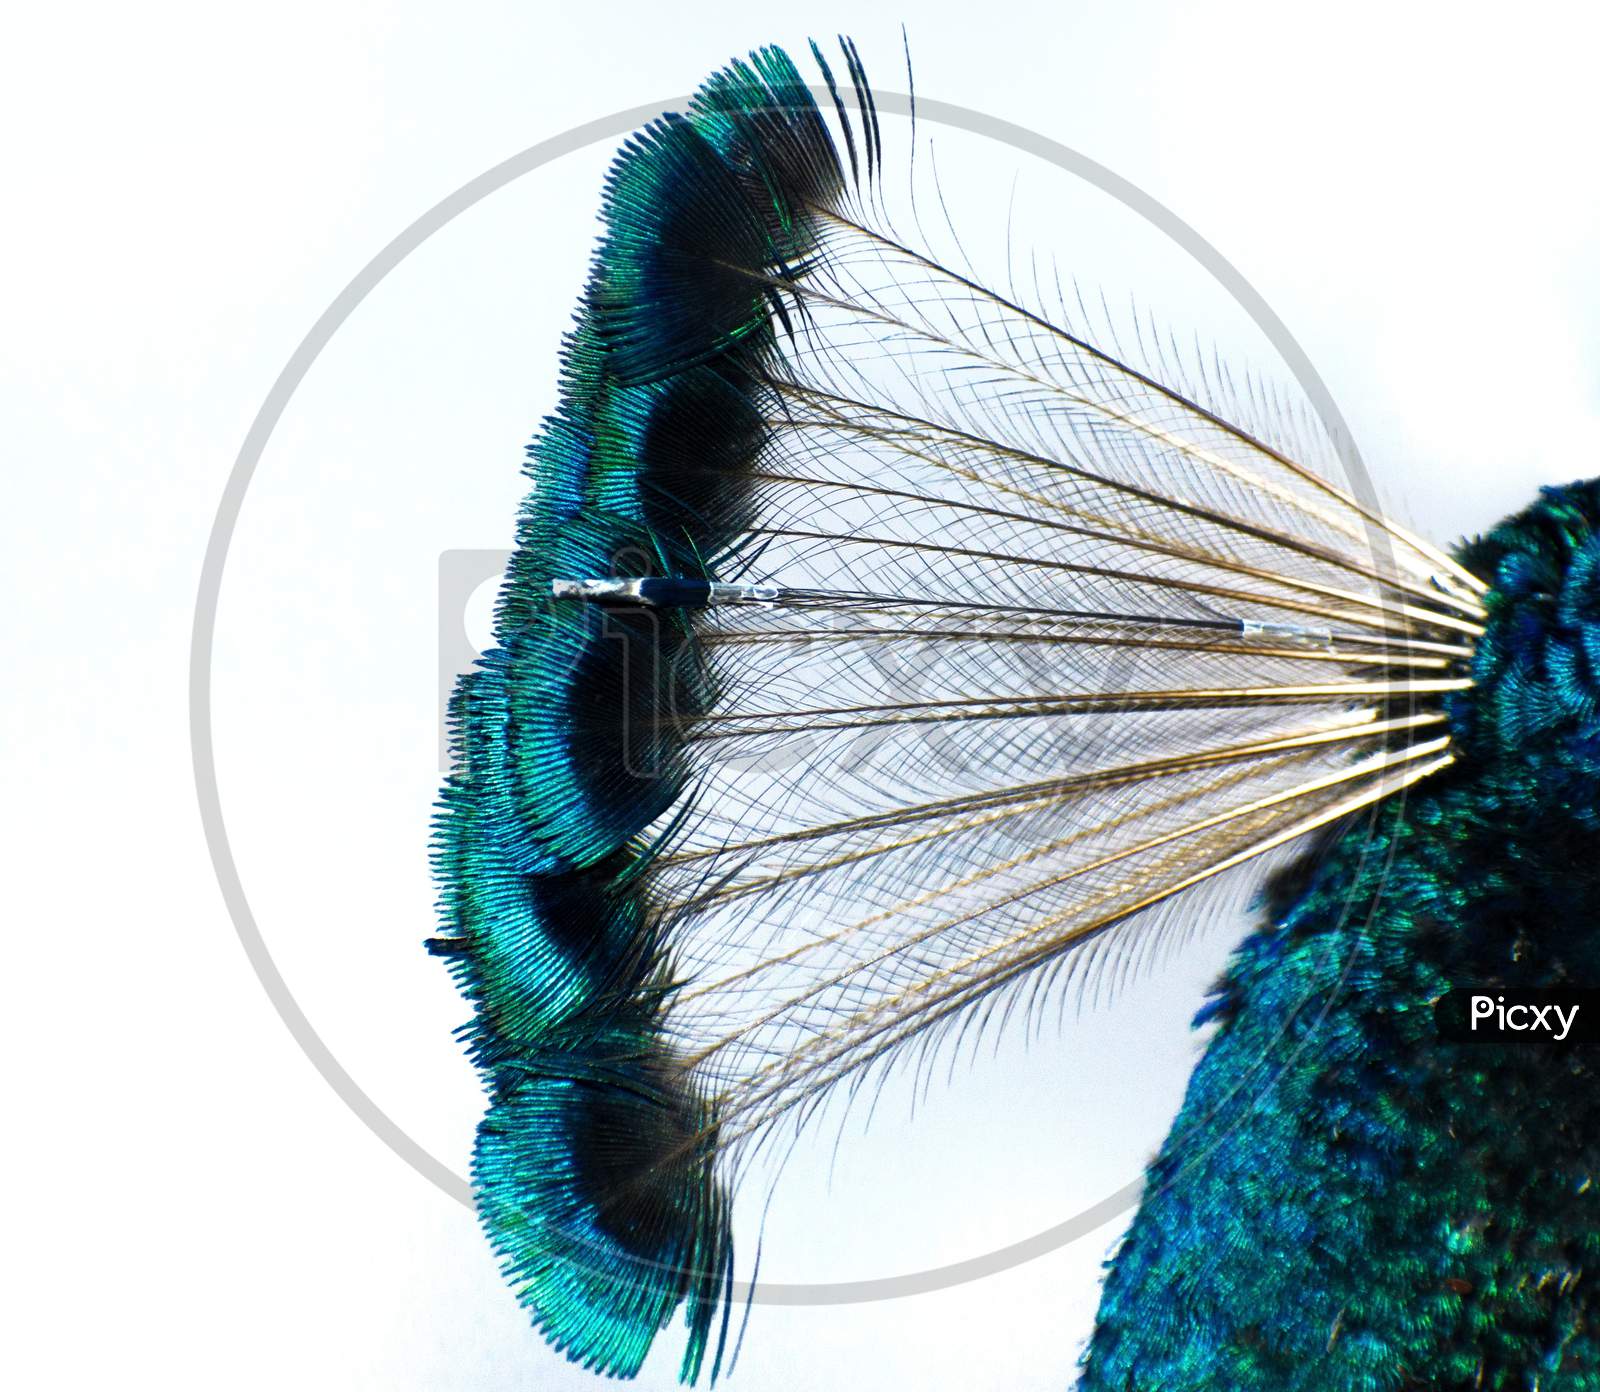 Peacock Crest Feathers Close Up Shot Isolated On White.